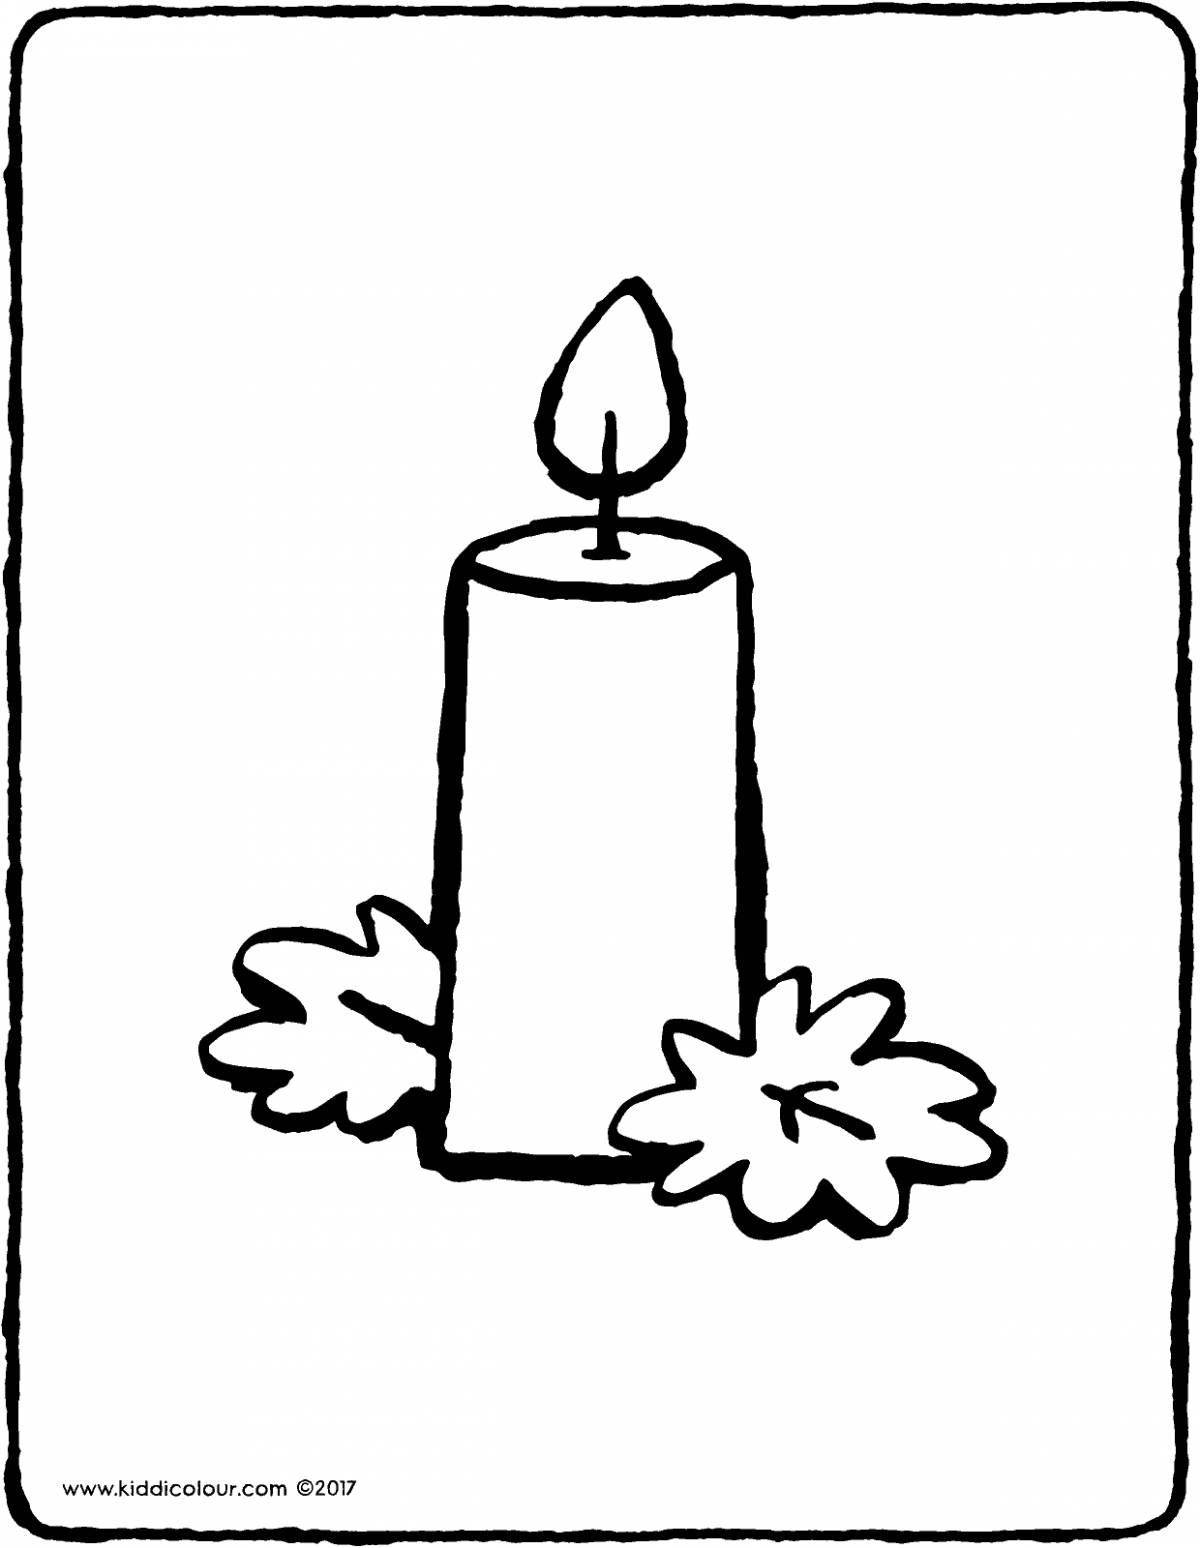 Glamorous candle coloring book for kids